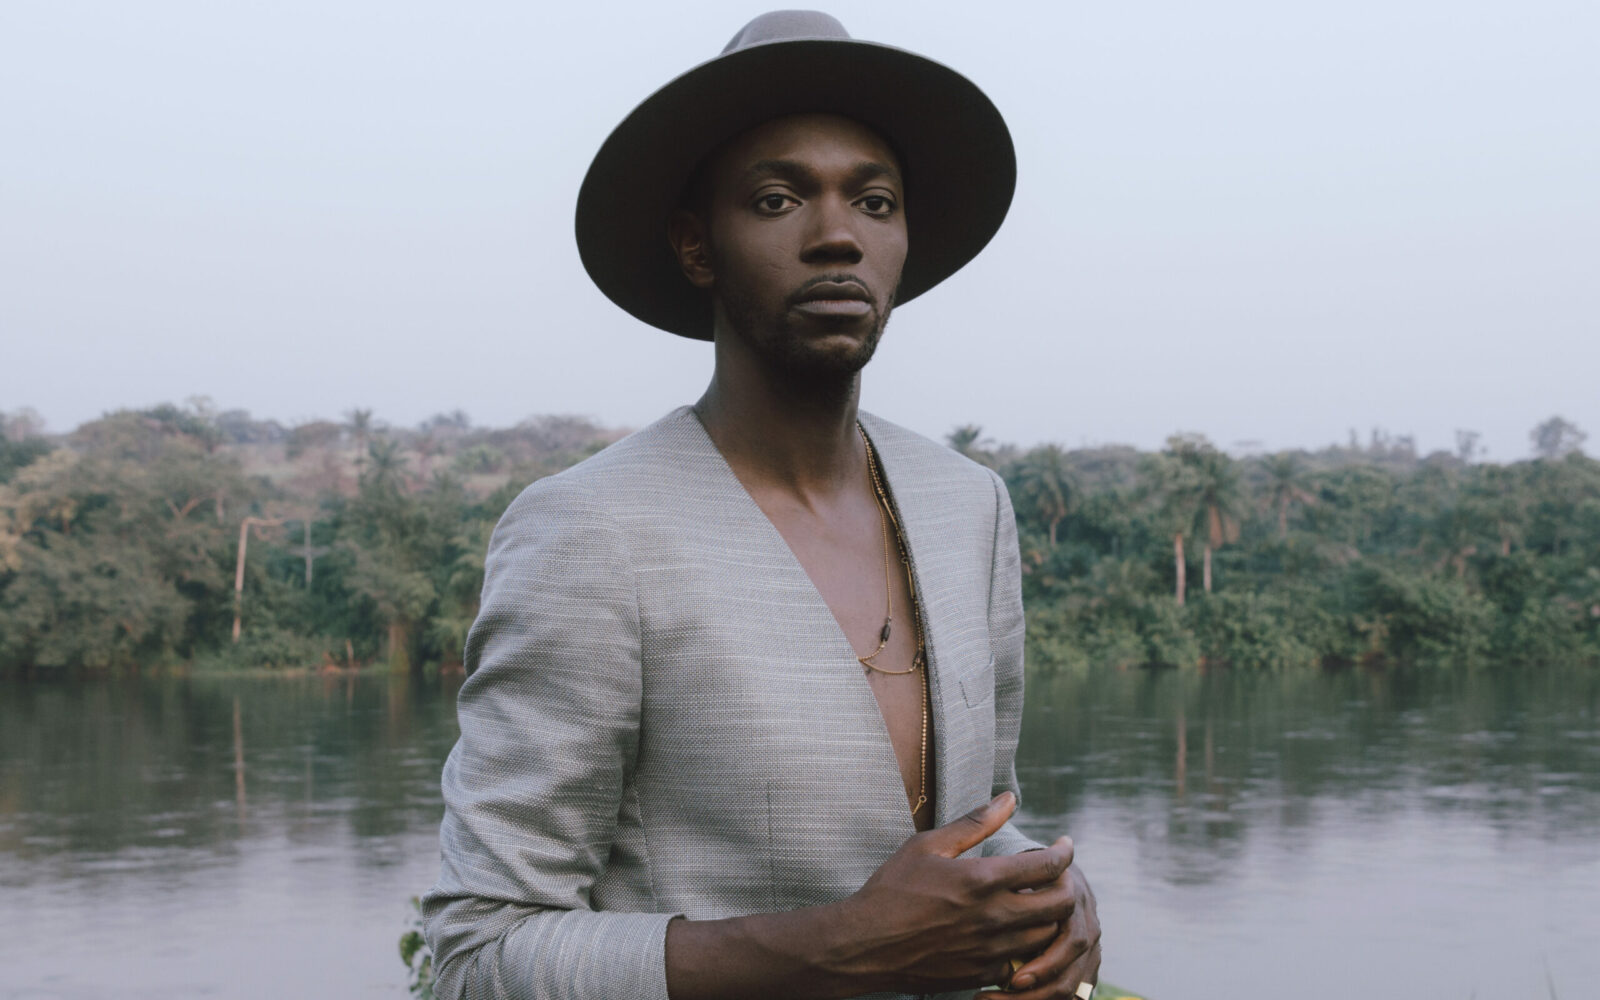 Not there by accident: Interview with film maker Baloji about Augure